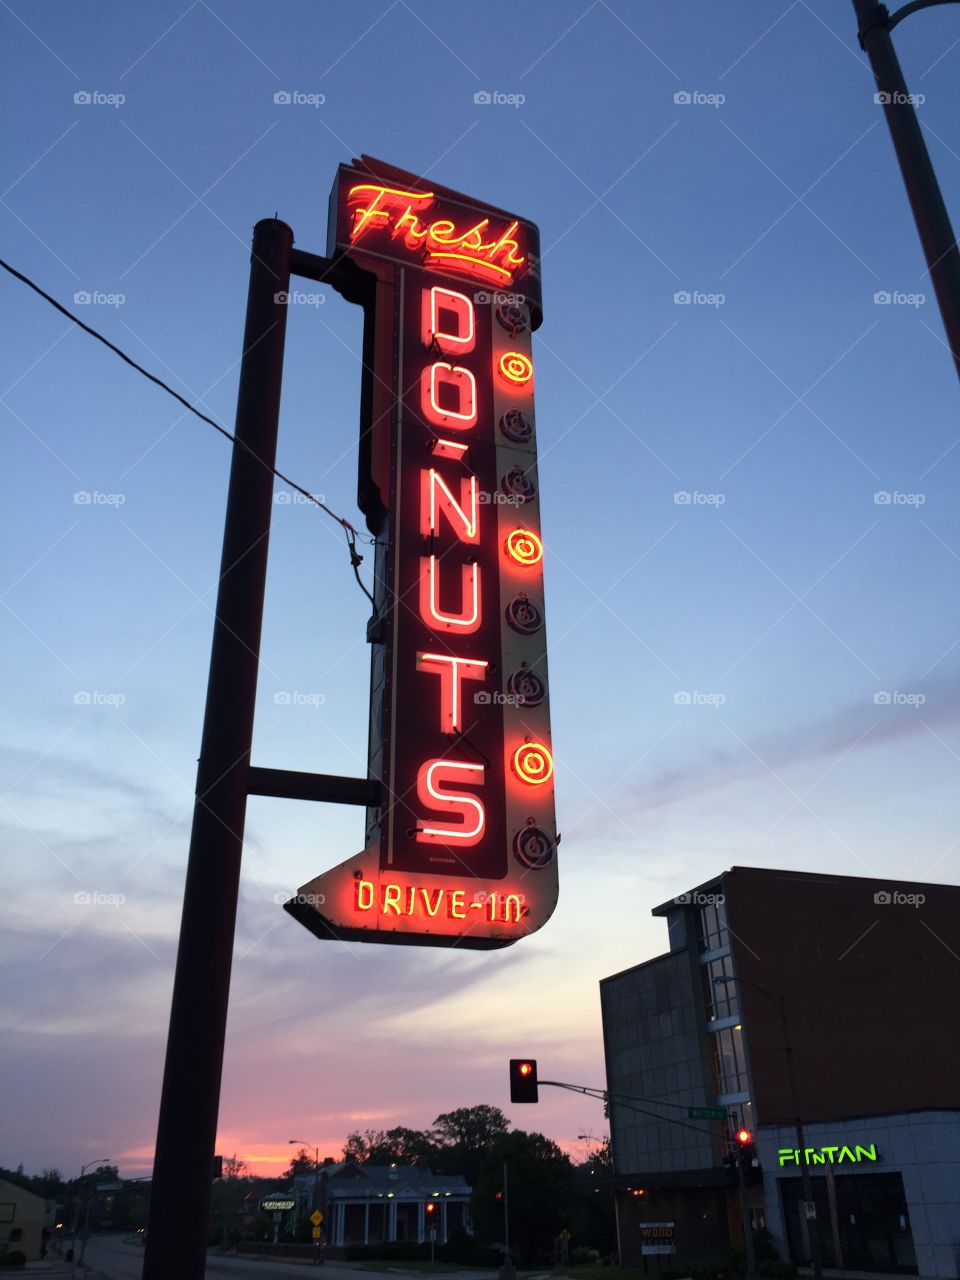 Donut sign. Nothing says happy morning like stopping at your favorite donut place early in the morning! 